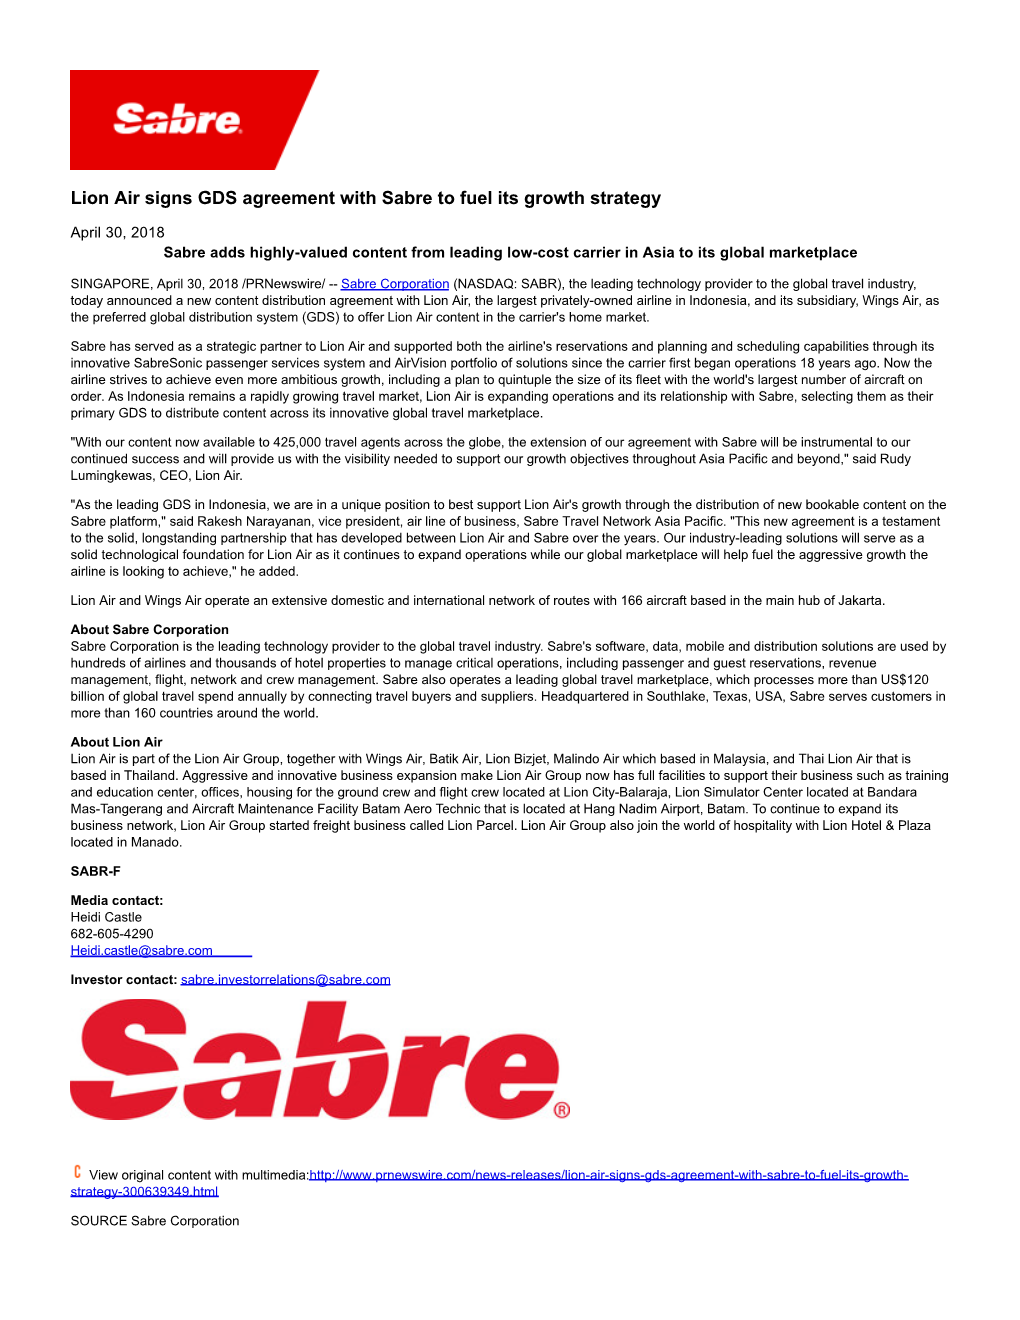 Lion Air Signs GDS Agreement with Sabre to Fuel Its Growth Strategy